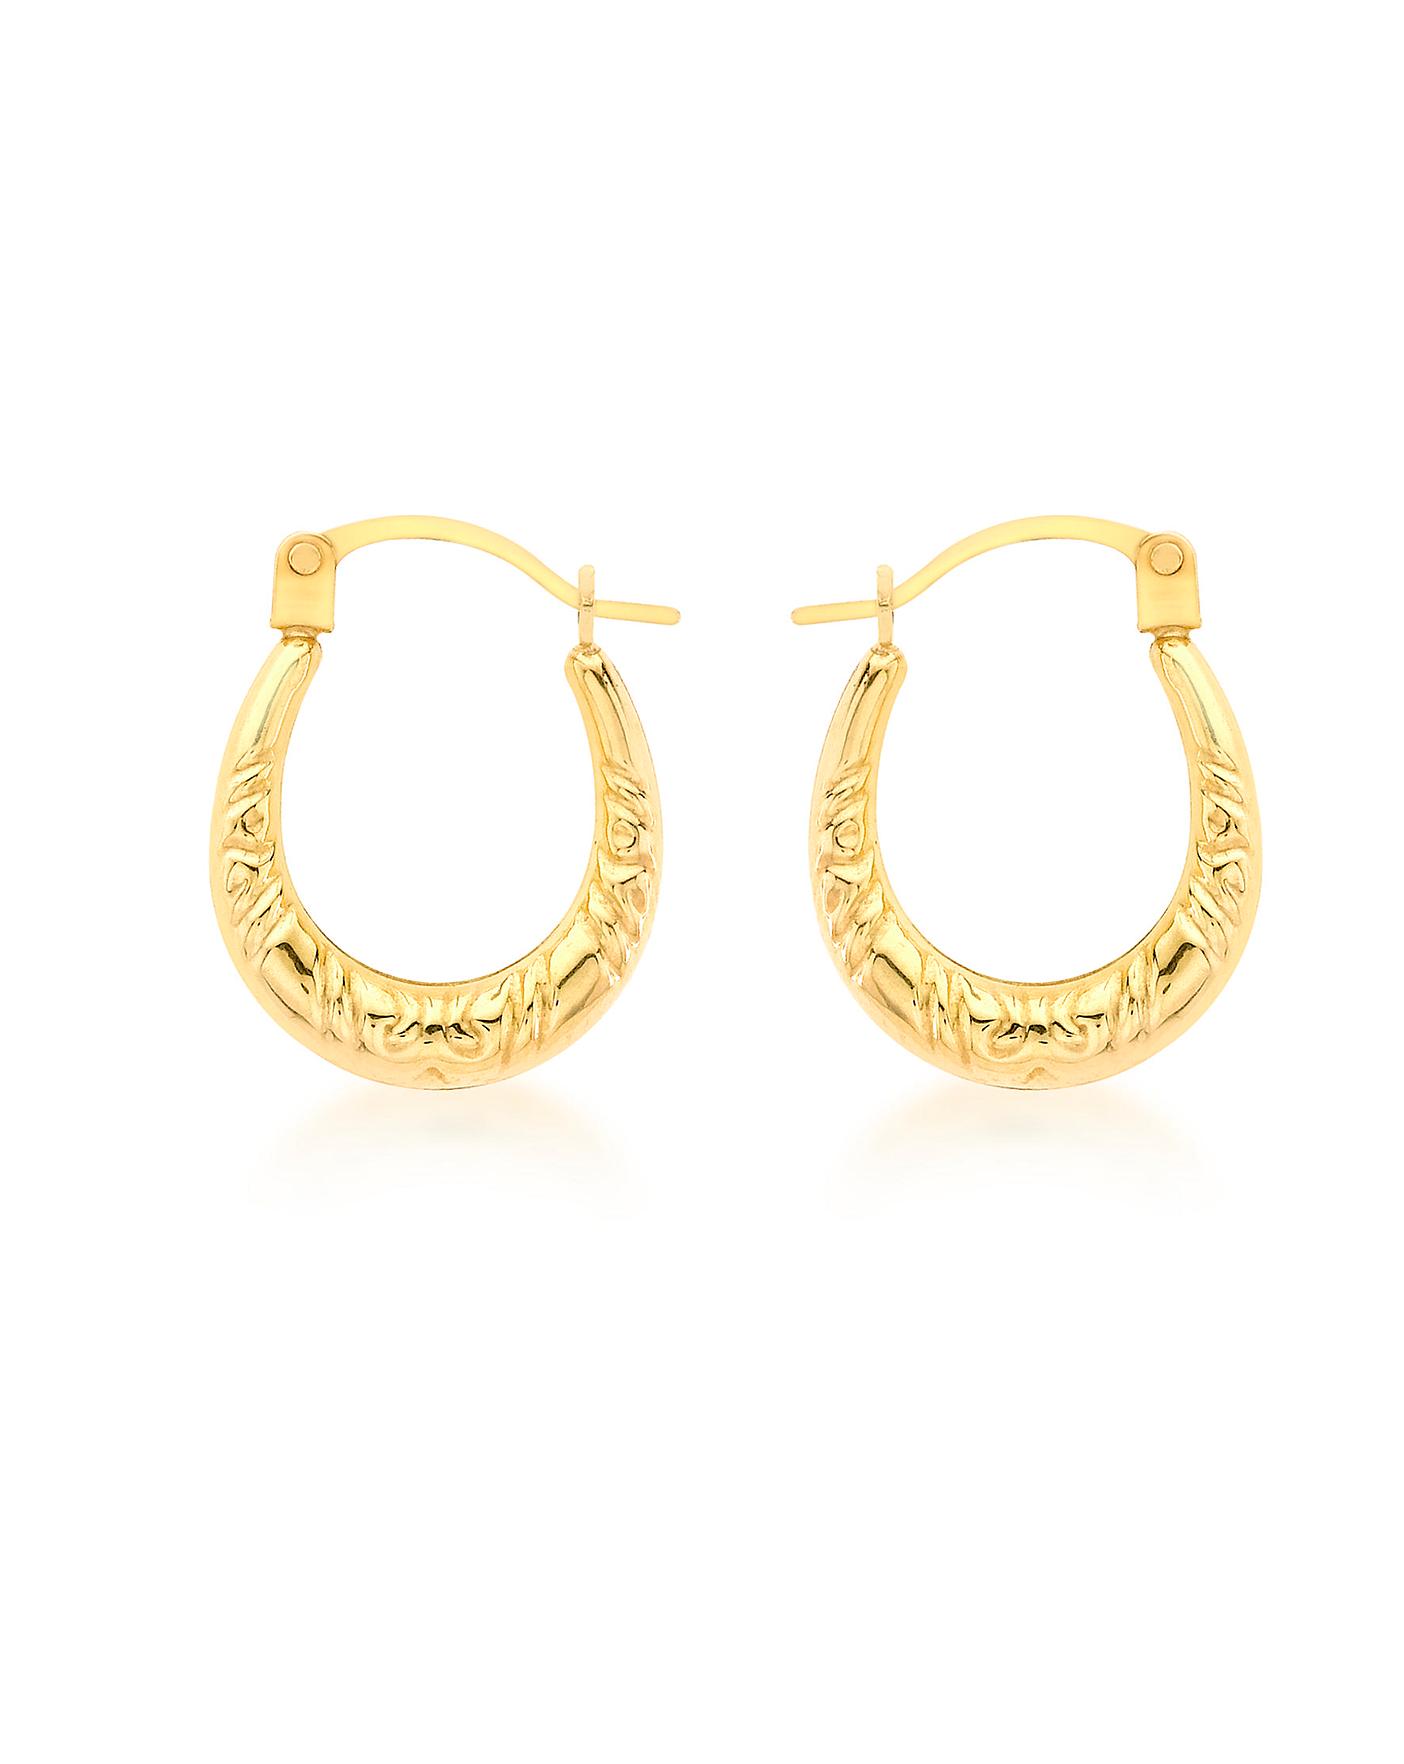 9ct Gold Patterned Creole Earrings | J D Williams